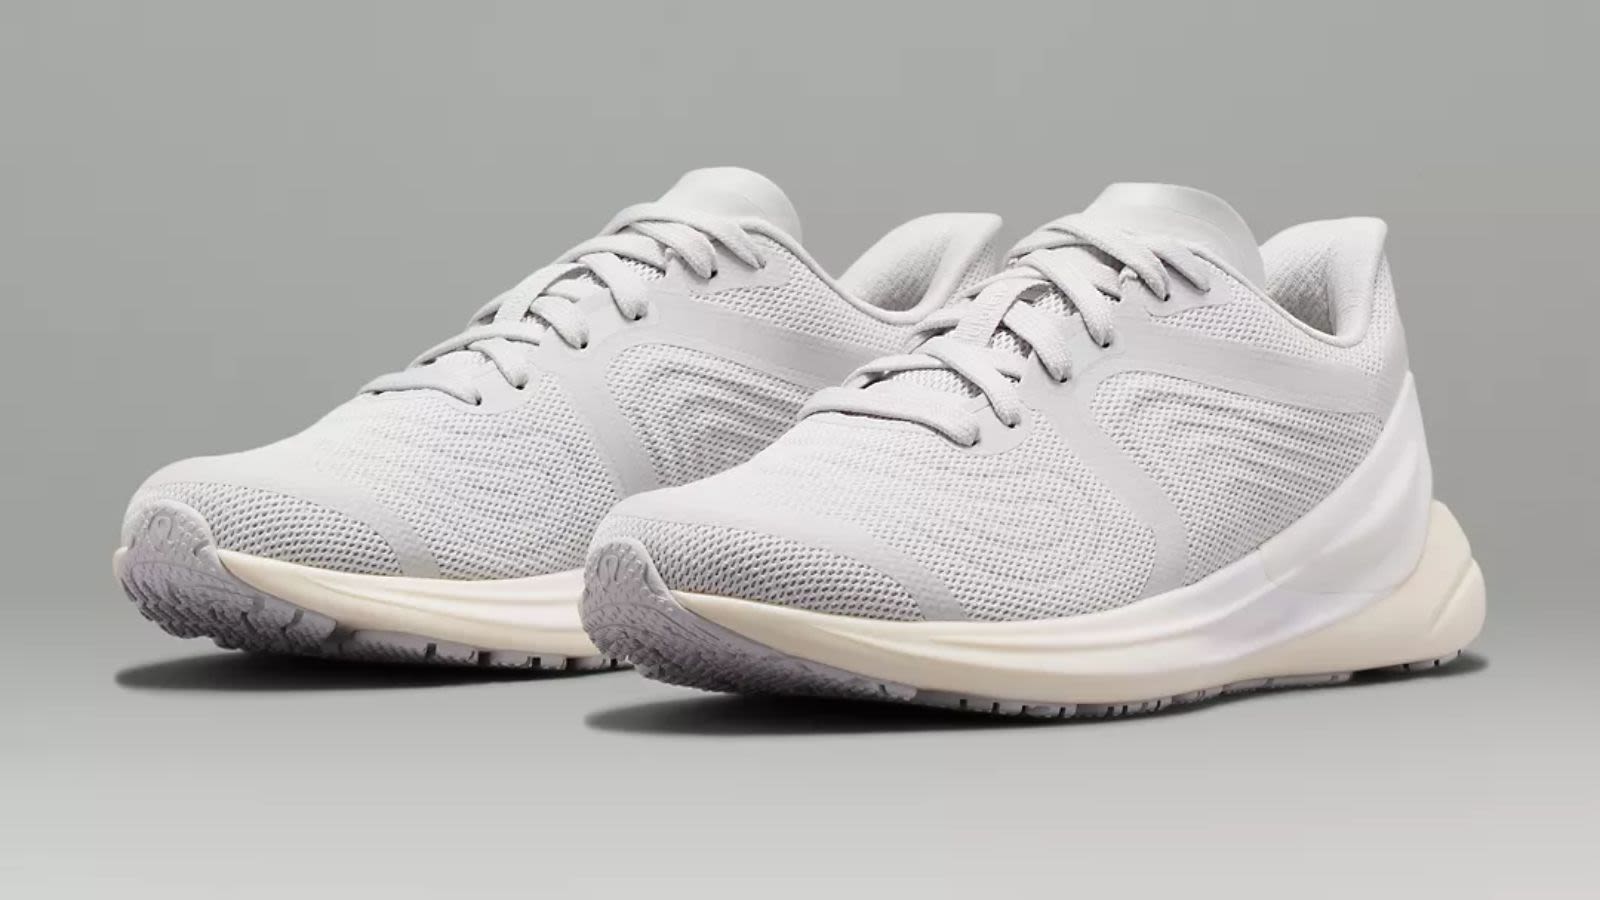 Lululemon's New 'Instant Classic' Sneaker Is Selling Out Fast